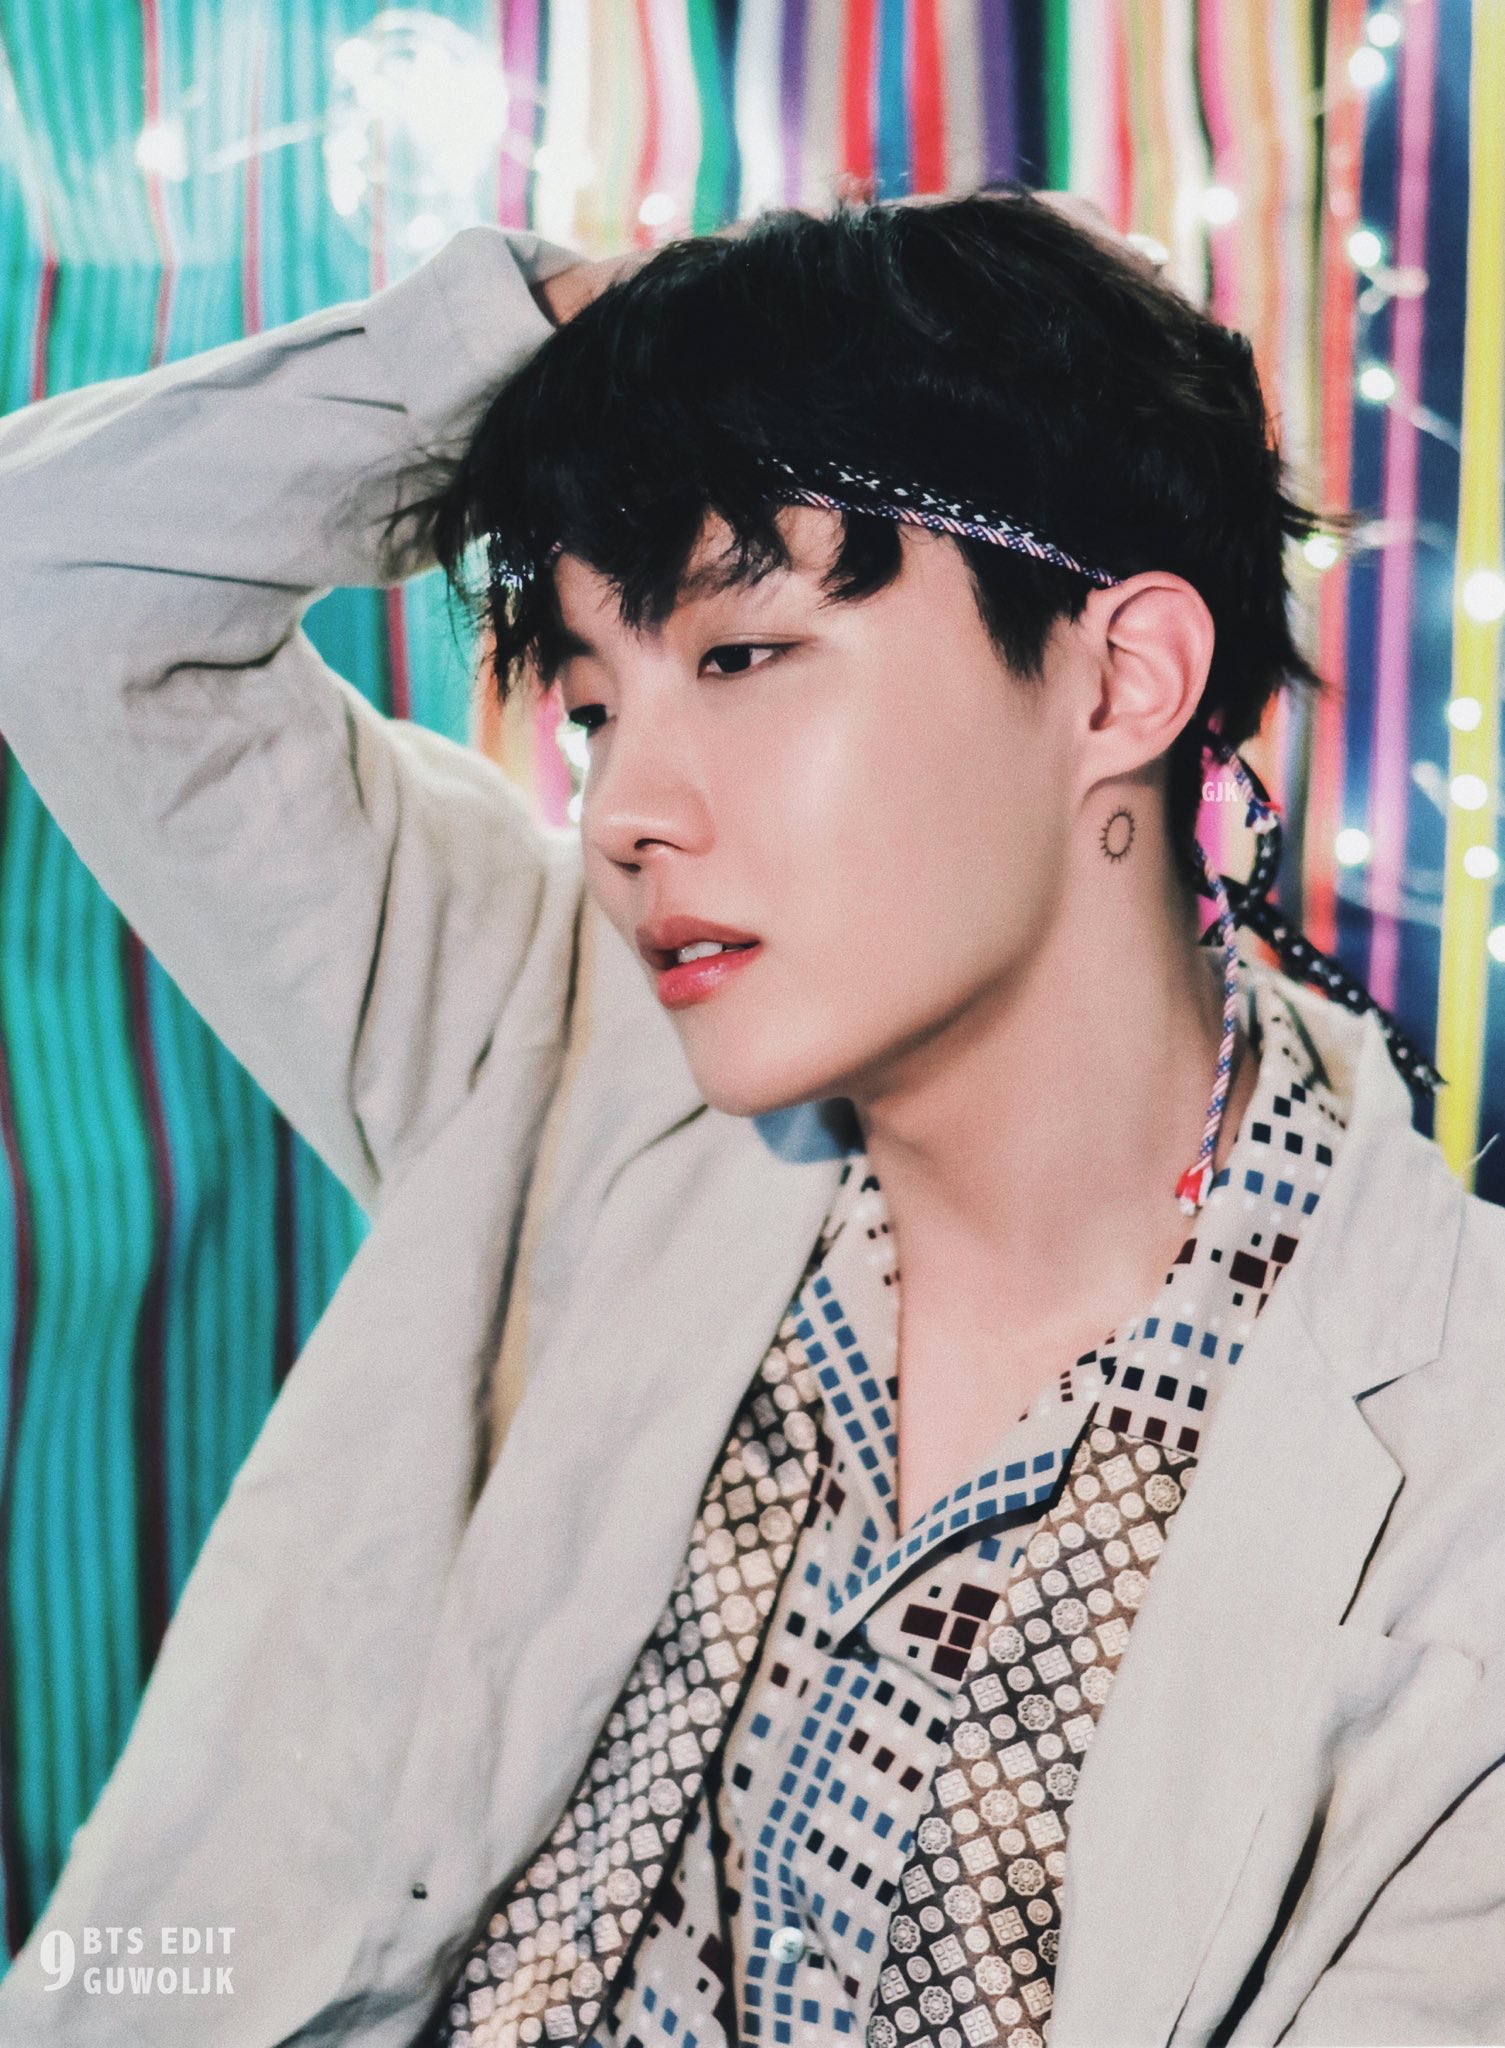 The 3 most stylish looks of J-Hope from BTS